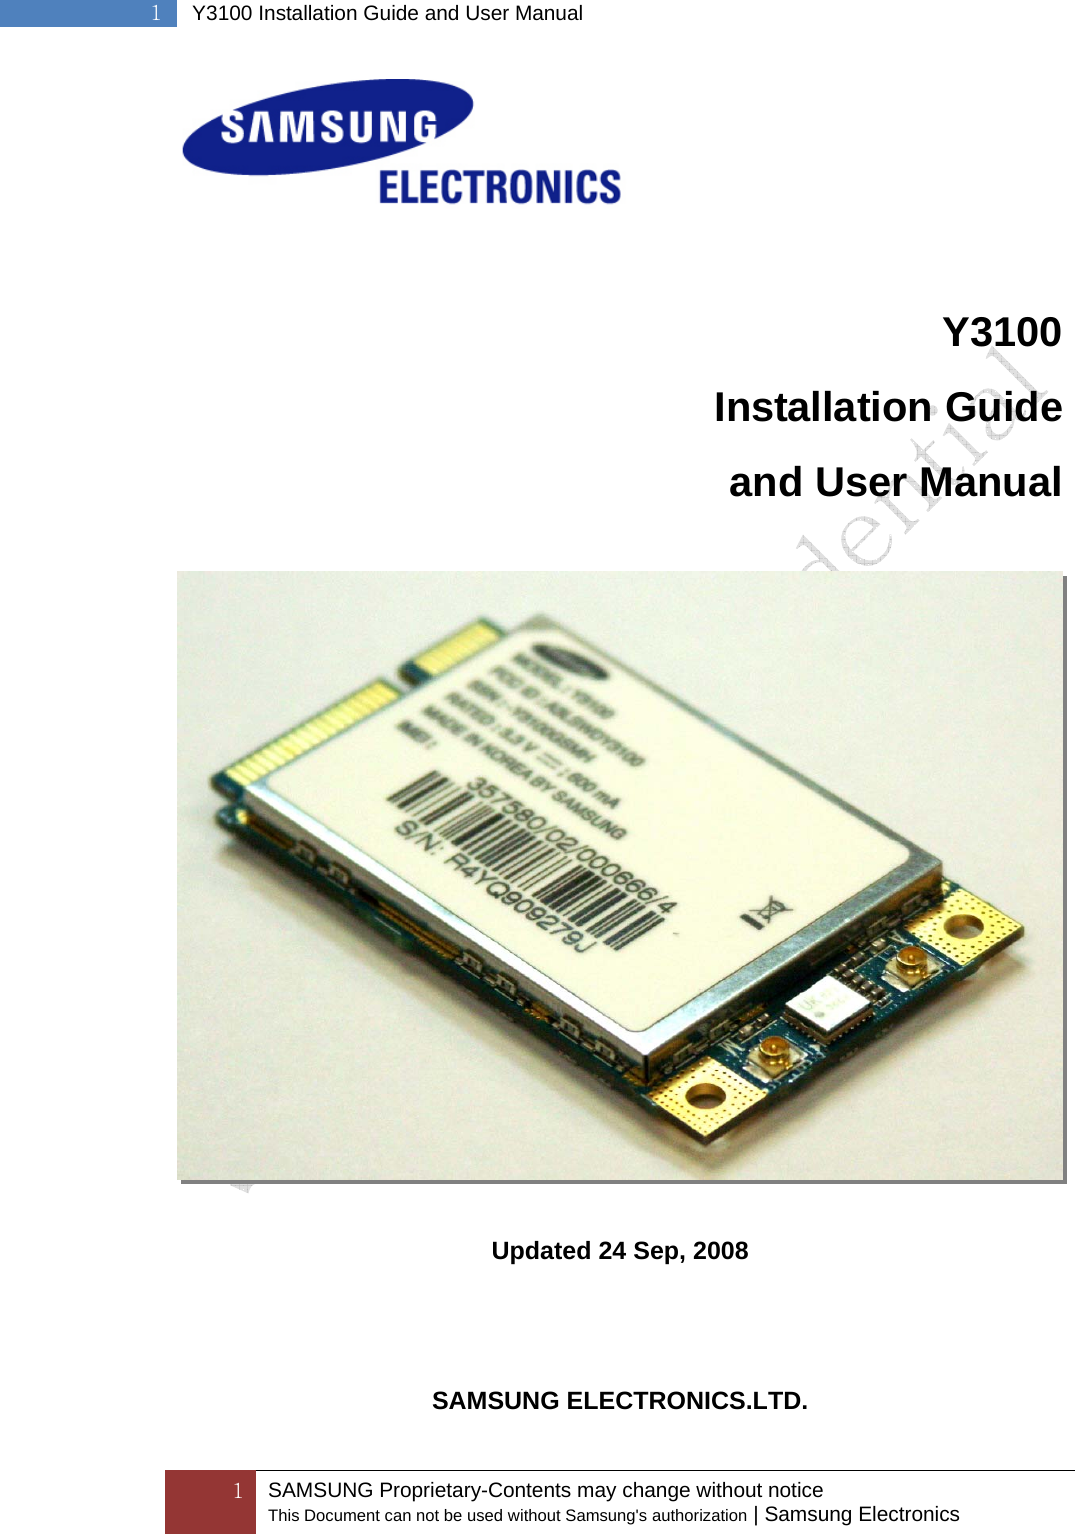  1 SAMSUNG Proprietary-Contents may change without notice This Document can not be used without Samsung&apos;s authorization | Samsung Electronics  1  Y3100 Installation Guide and User Manual   Y3100 Installation Guide and User Manual    Updated 24 Sep, 2008    SAMSUNG ELECTRONICS.LTD. 